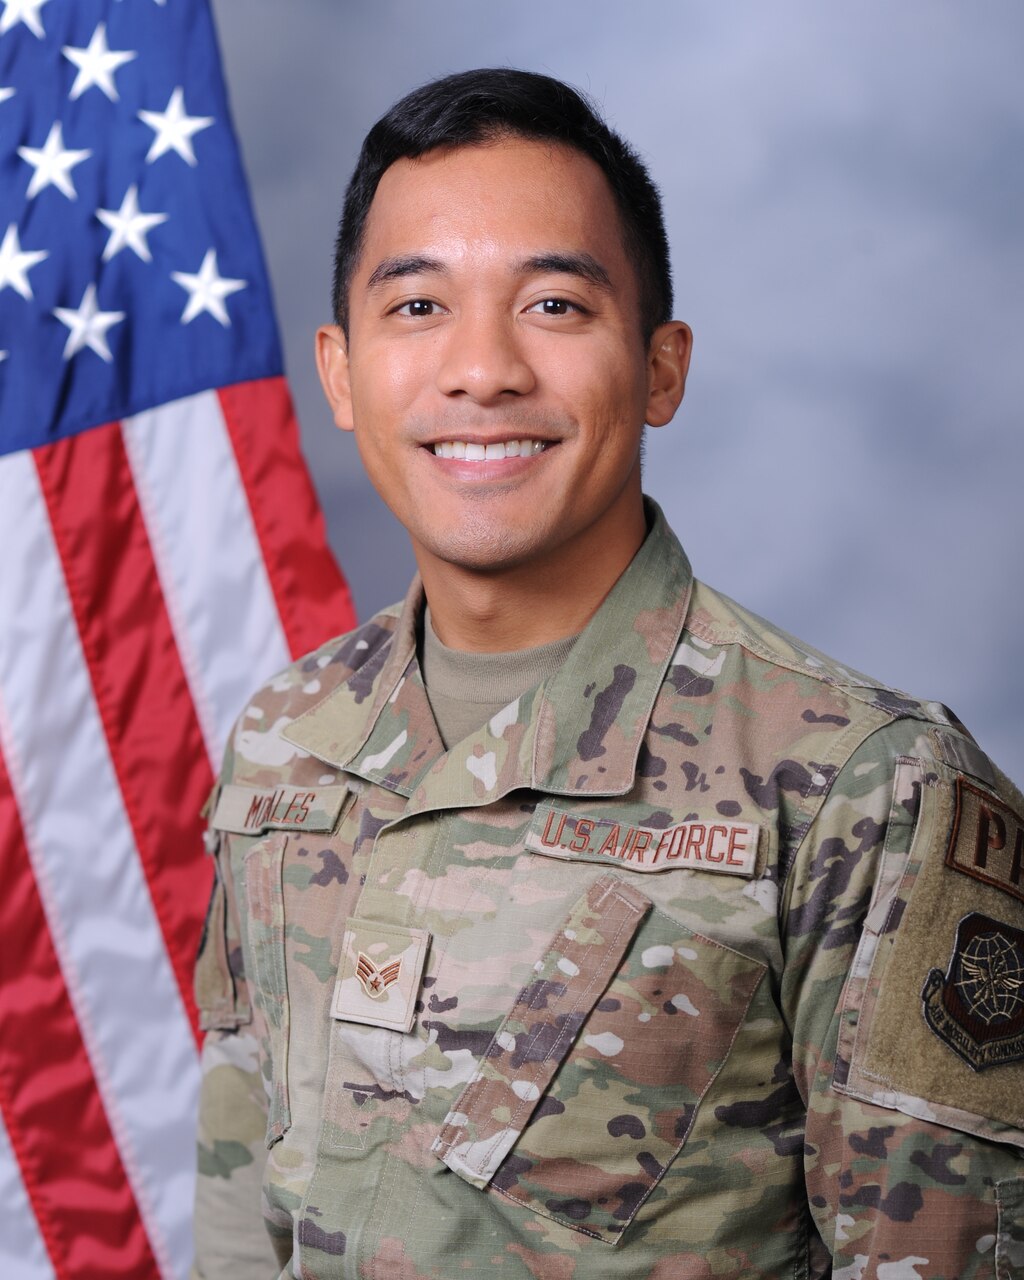 A male service member wearing a uniform poses for a photo.